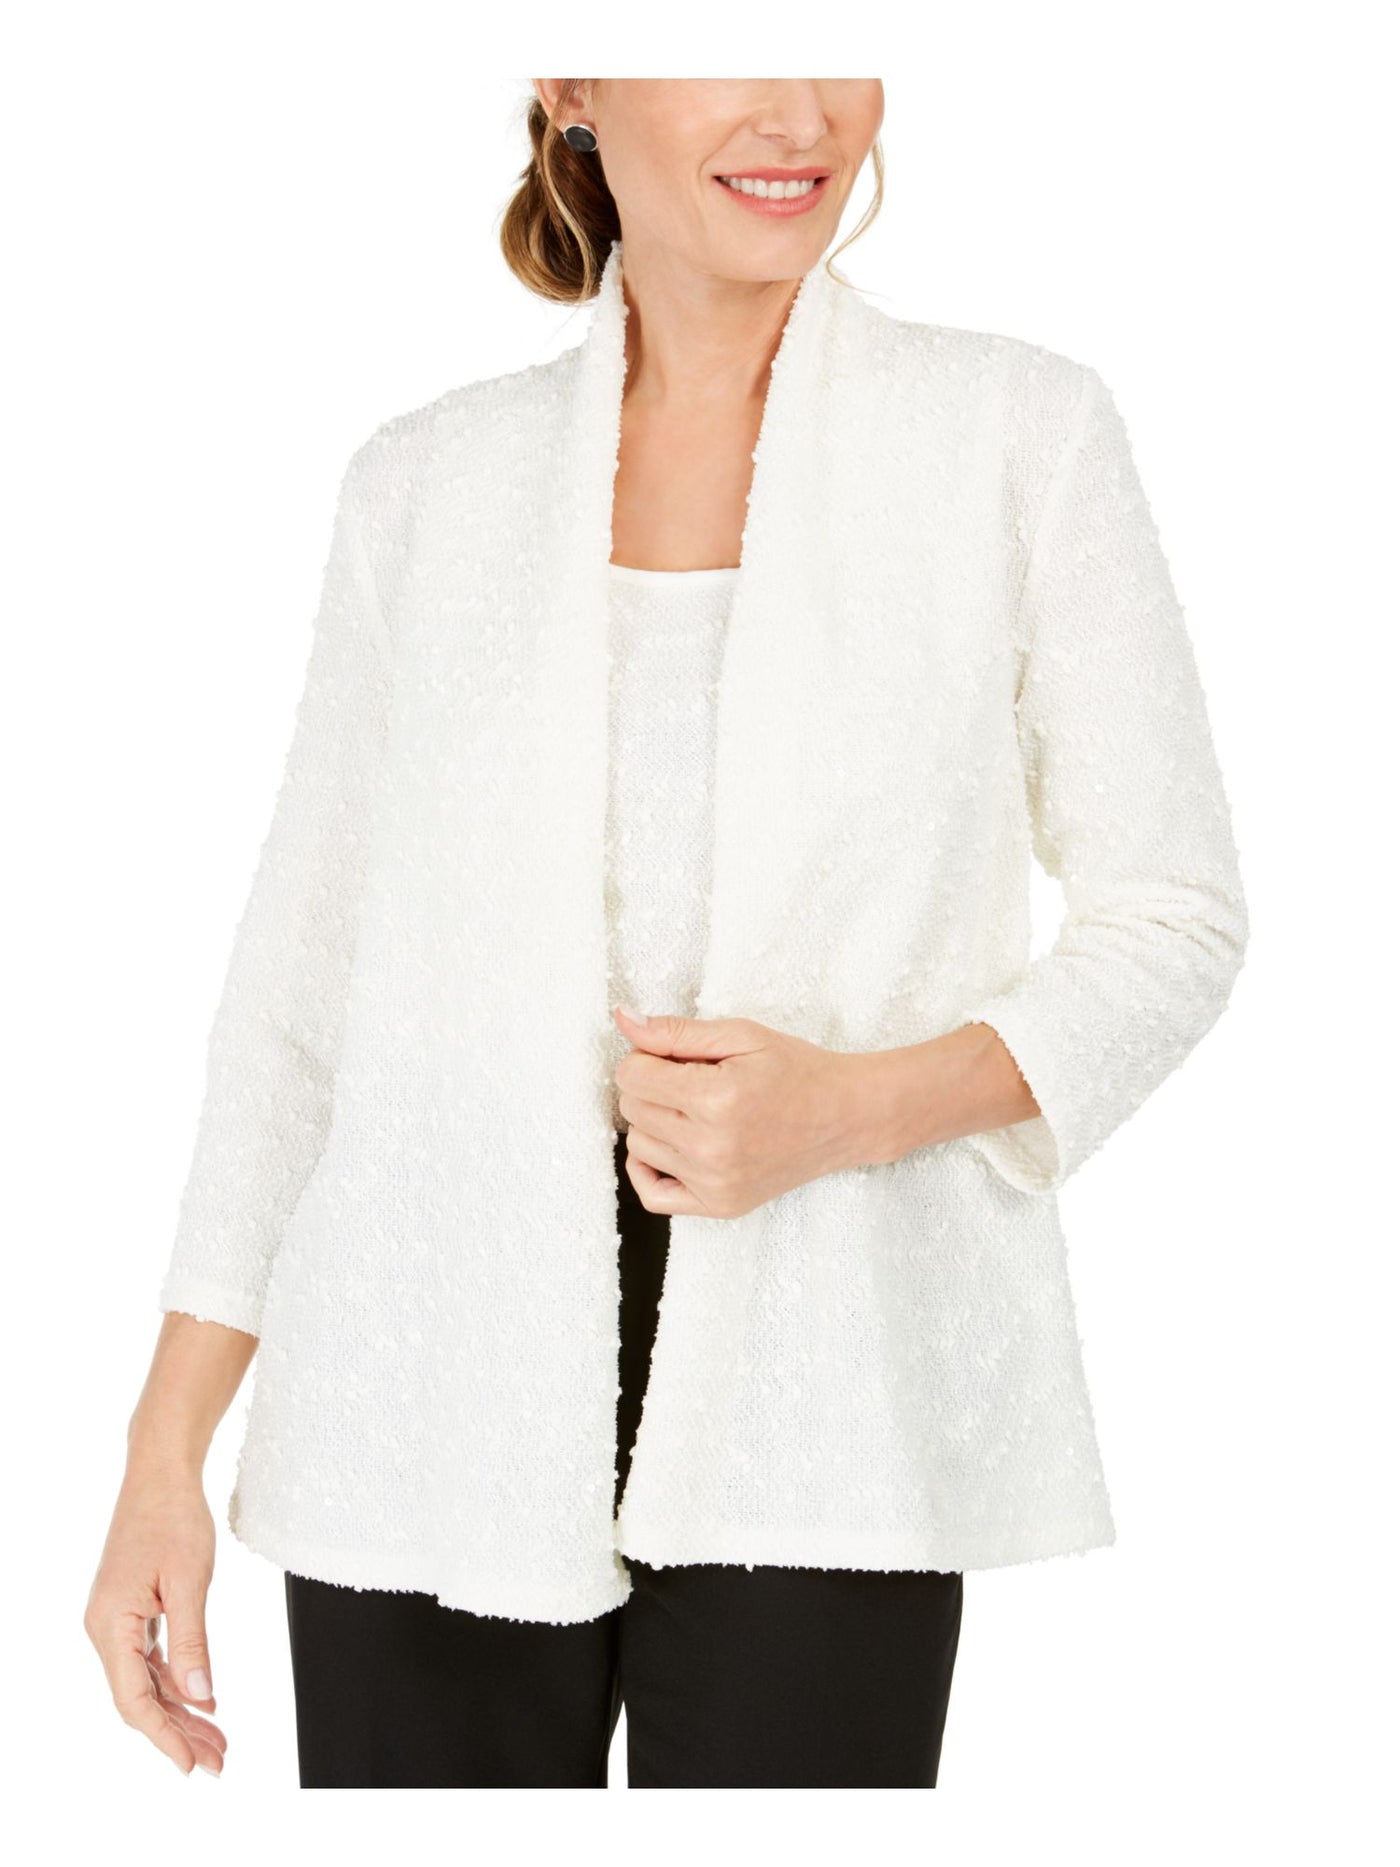 KASPER Womens Ivory Embroidered Textured 3/4 Sleeve Open Cardigan Evening Cardigan Petites PS